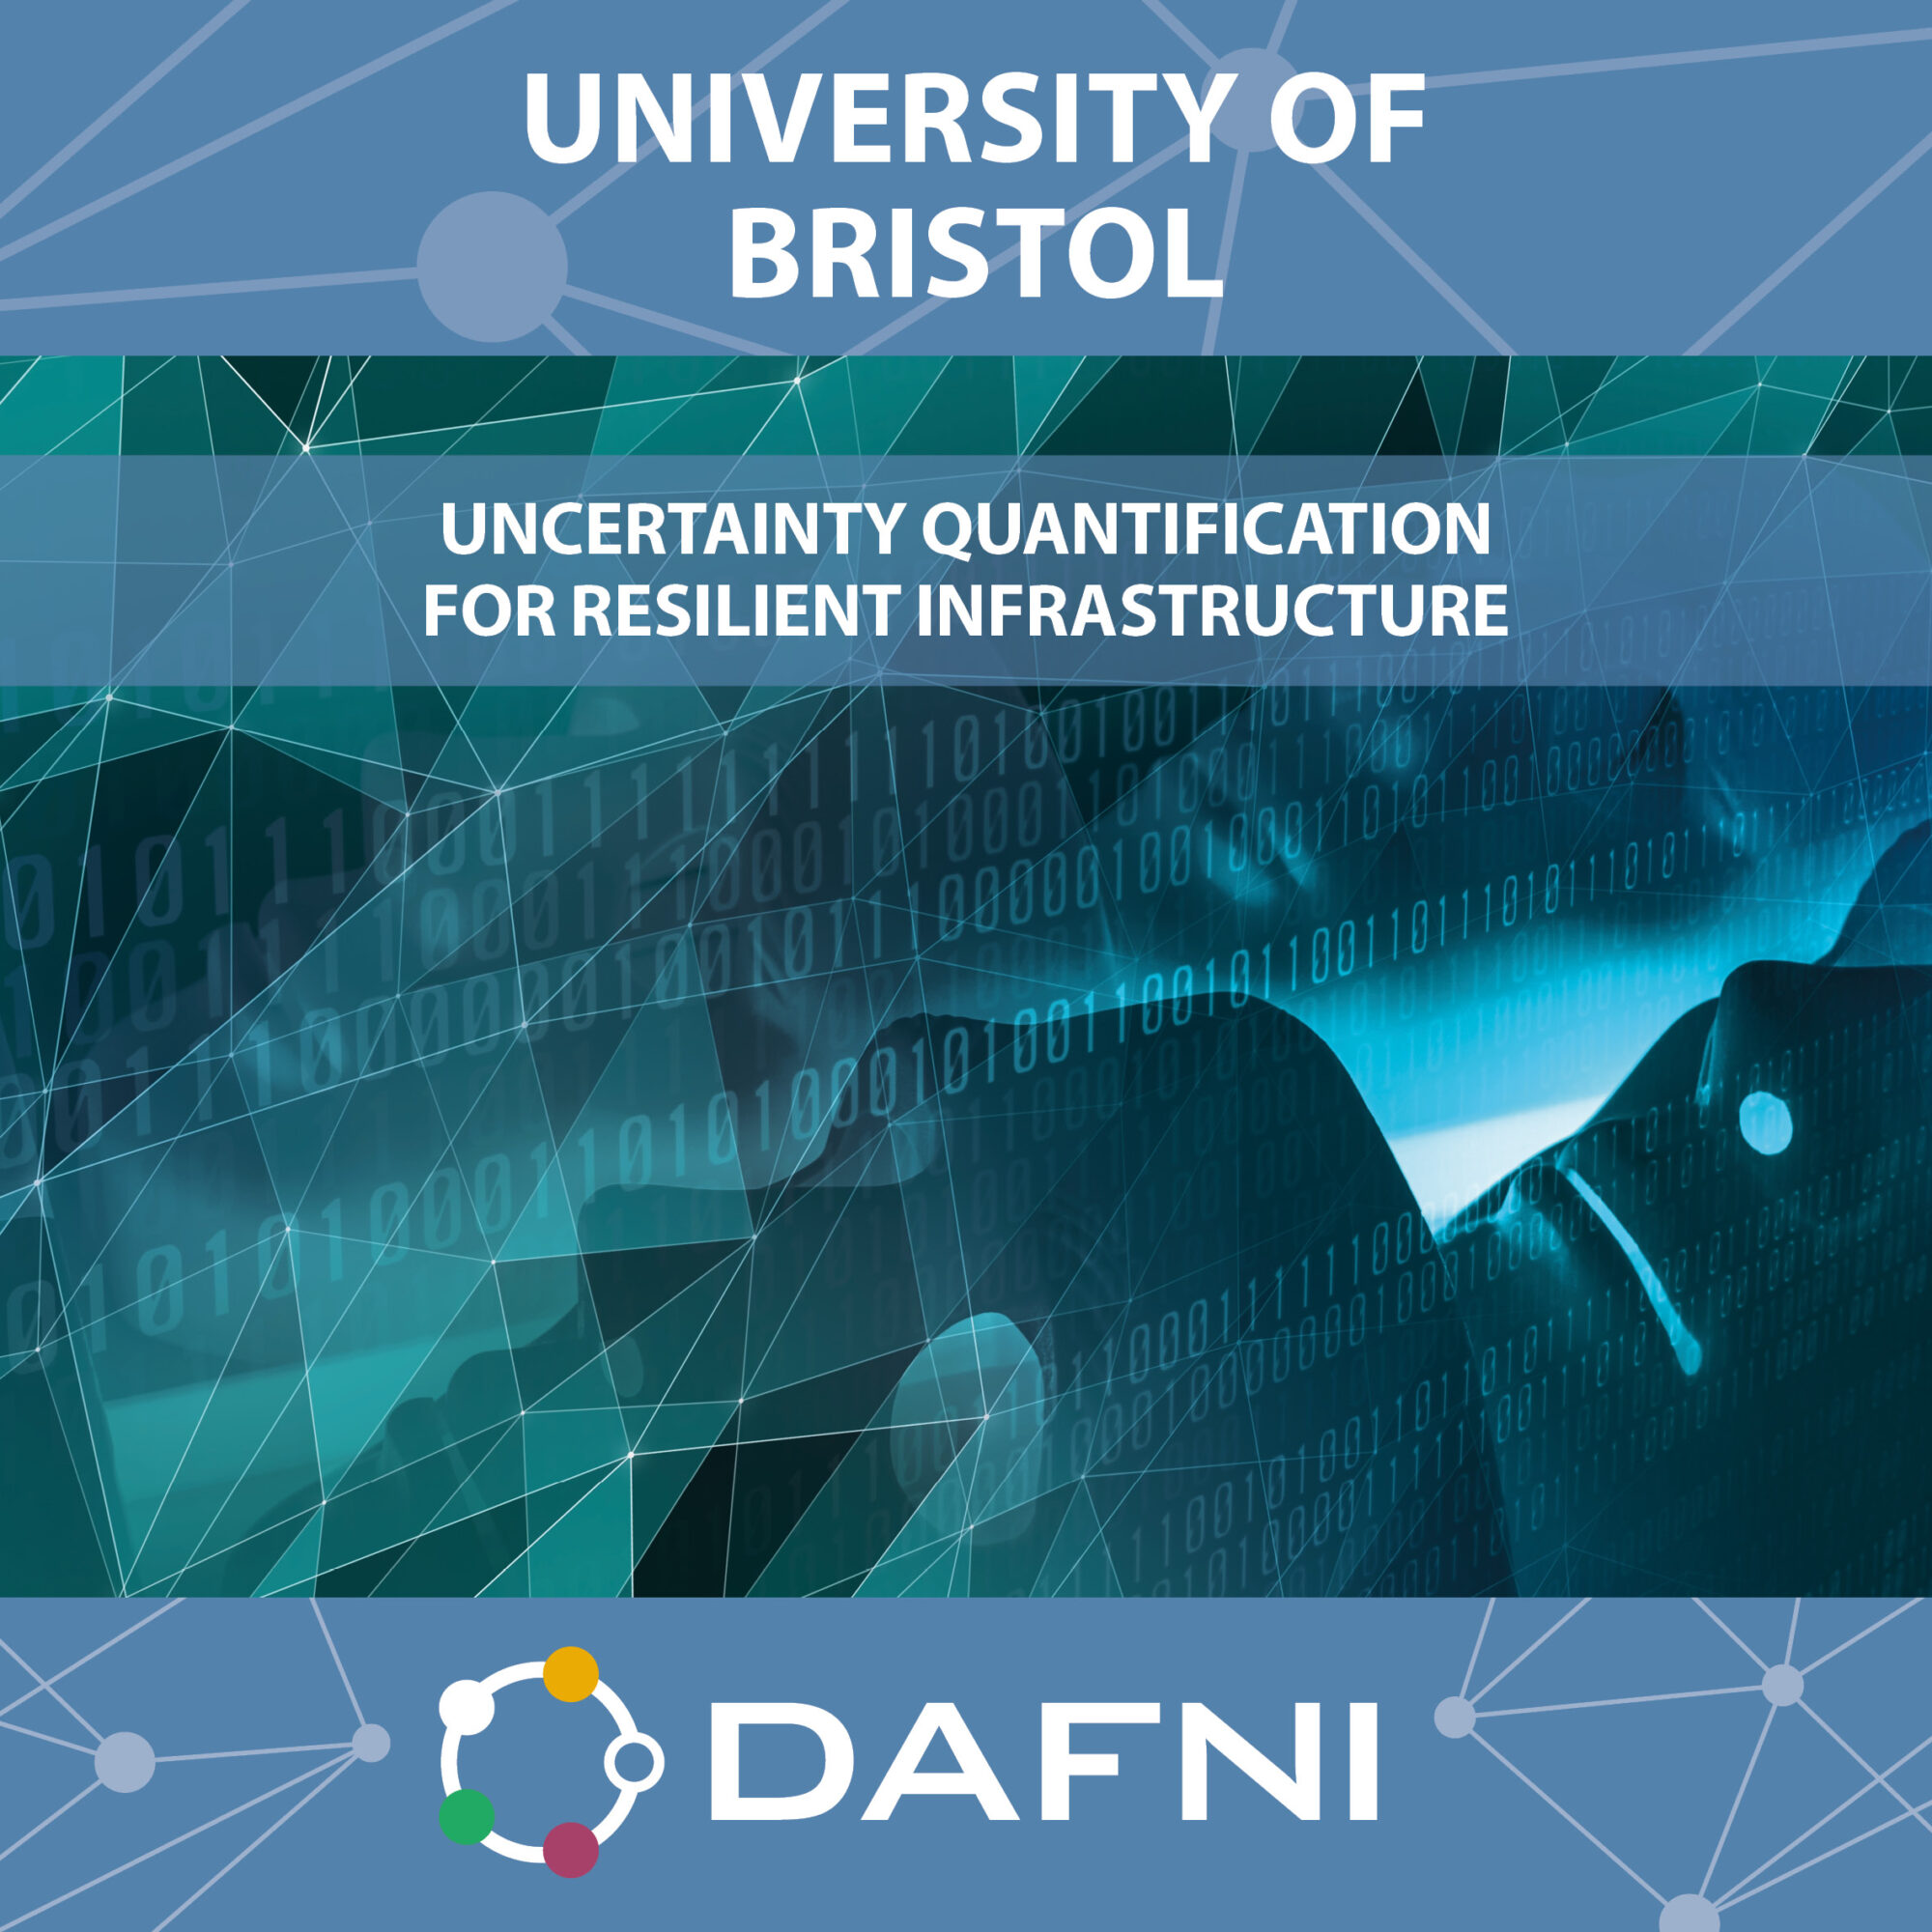 University of Bristol - Uncertainty quantification for resilient infrastructure